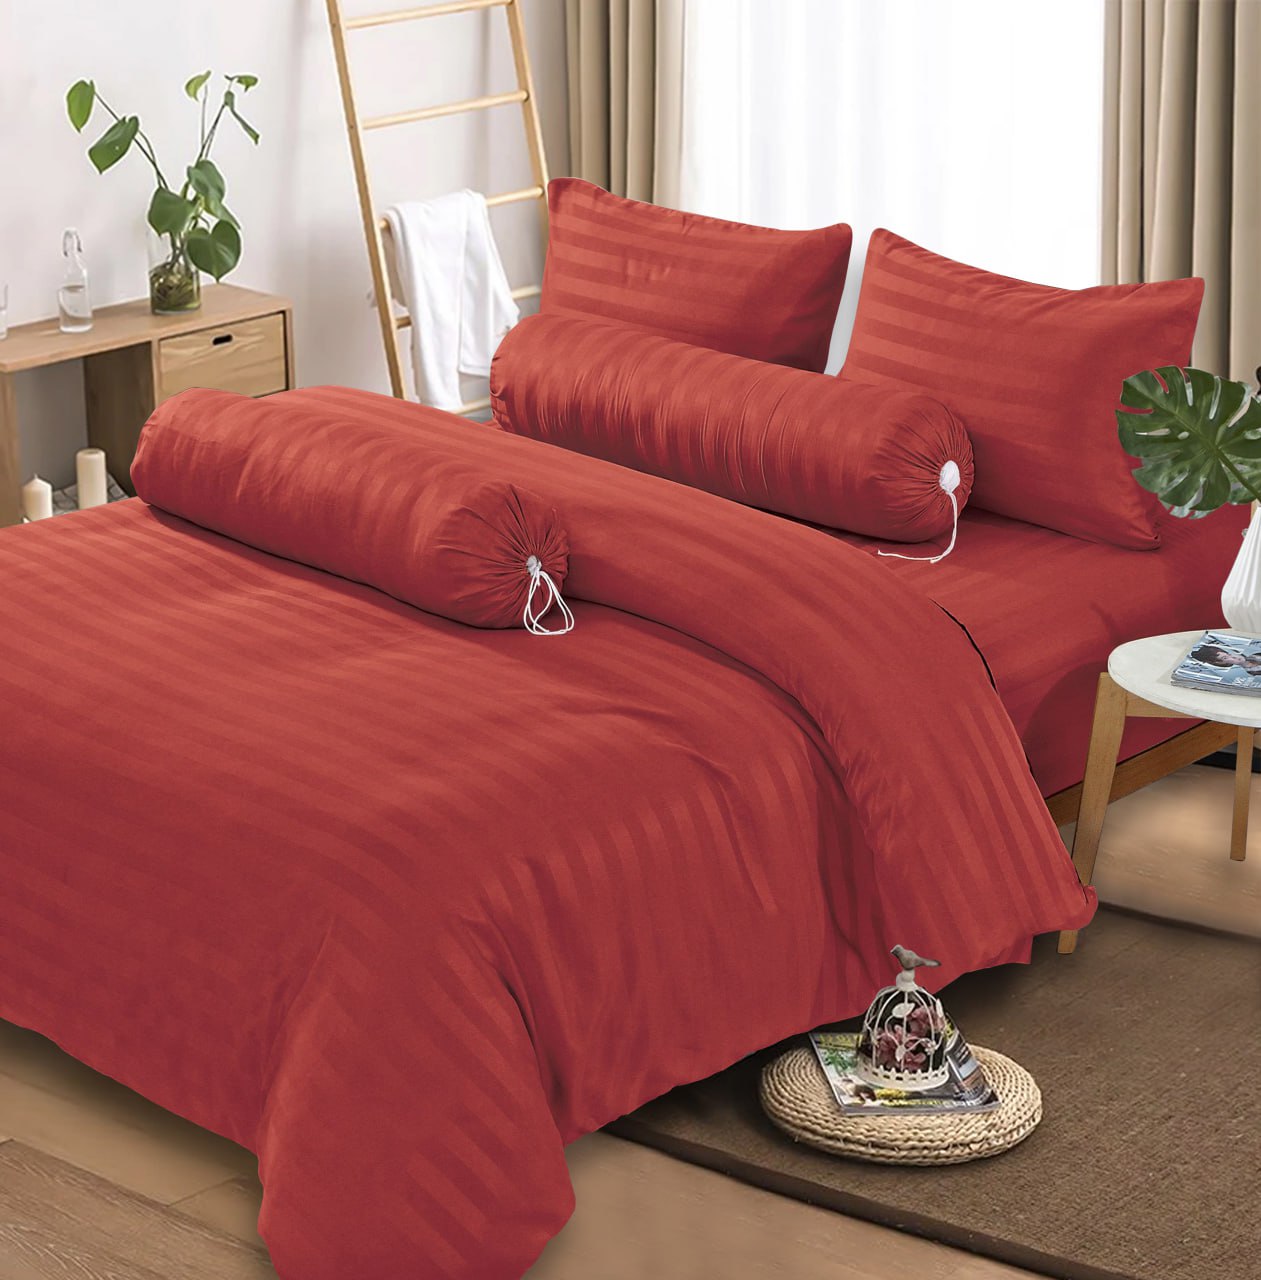 Microtex Super Single Bedding Set with Pillow & Bolster Case